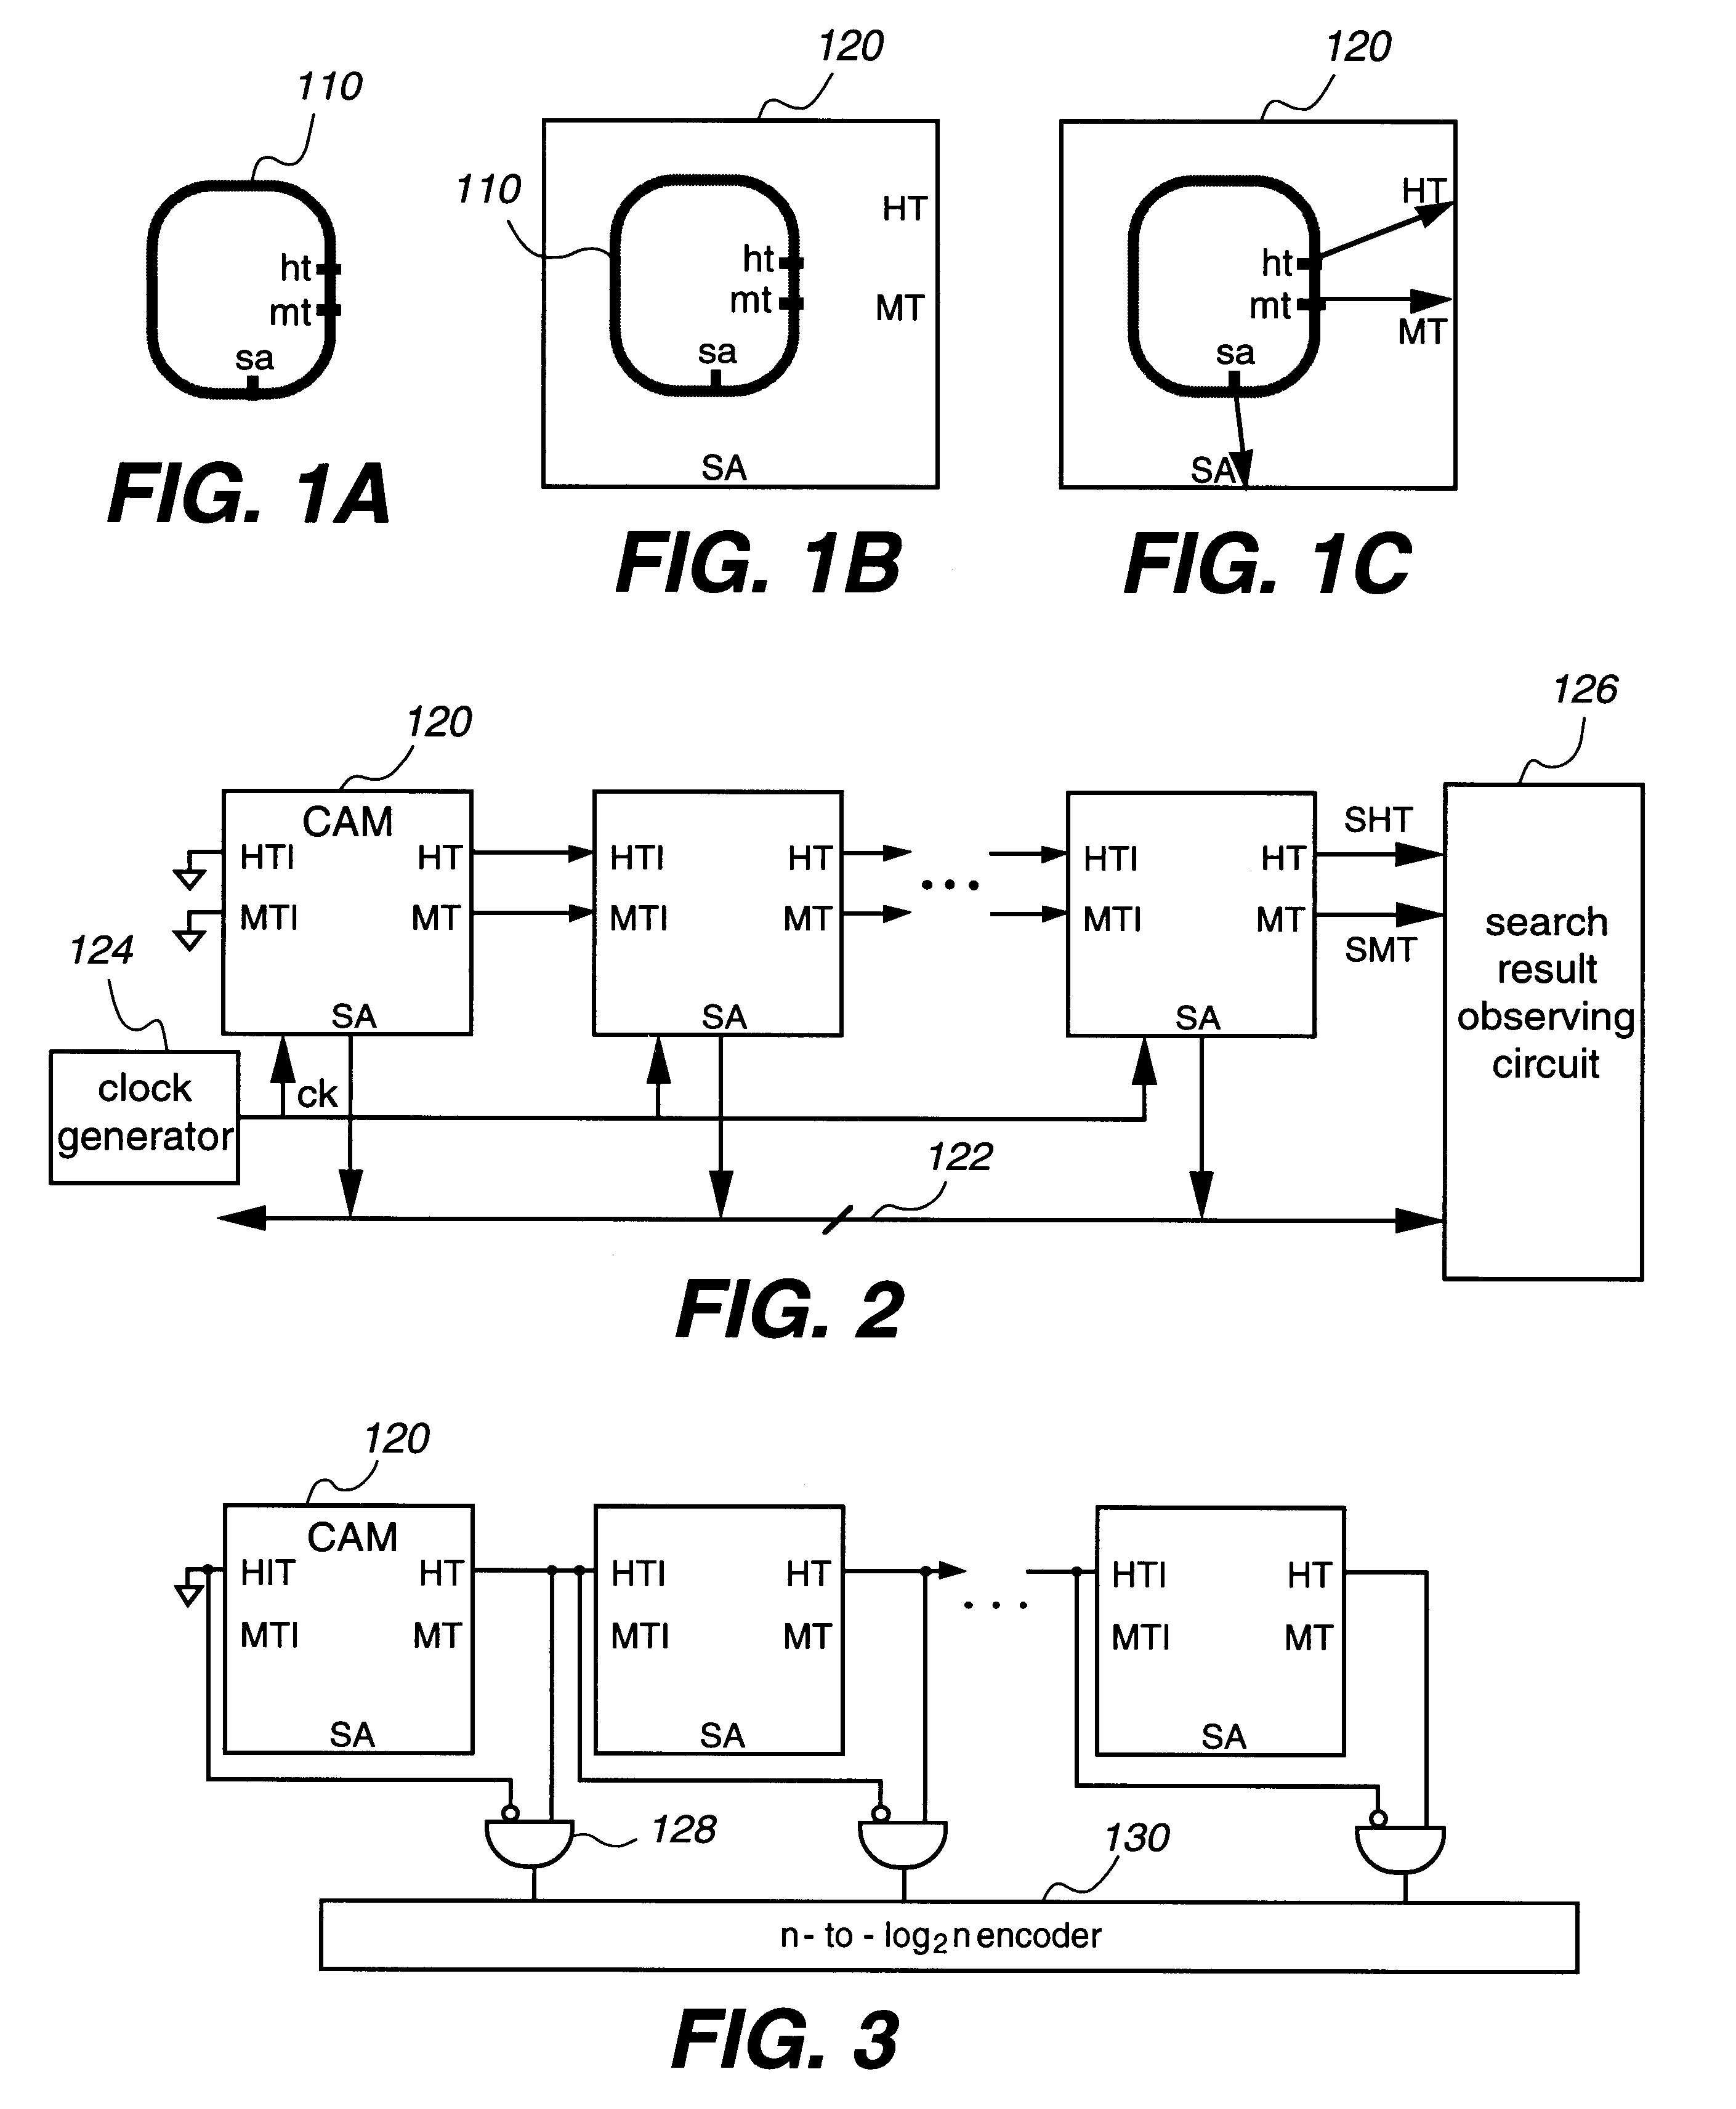 Content addressable memory system with cascaded memories and self timed signals